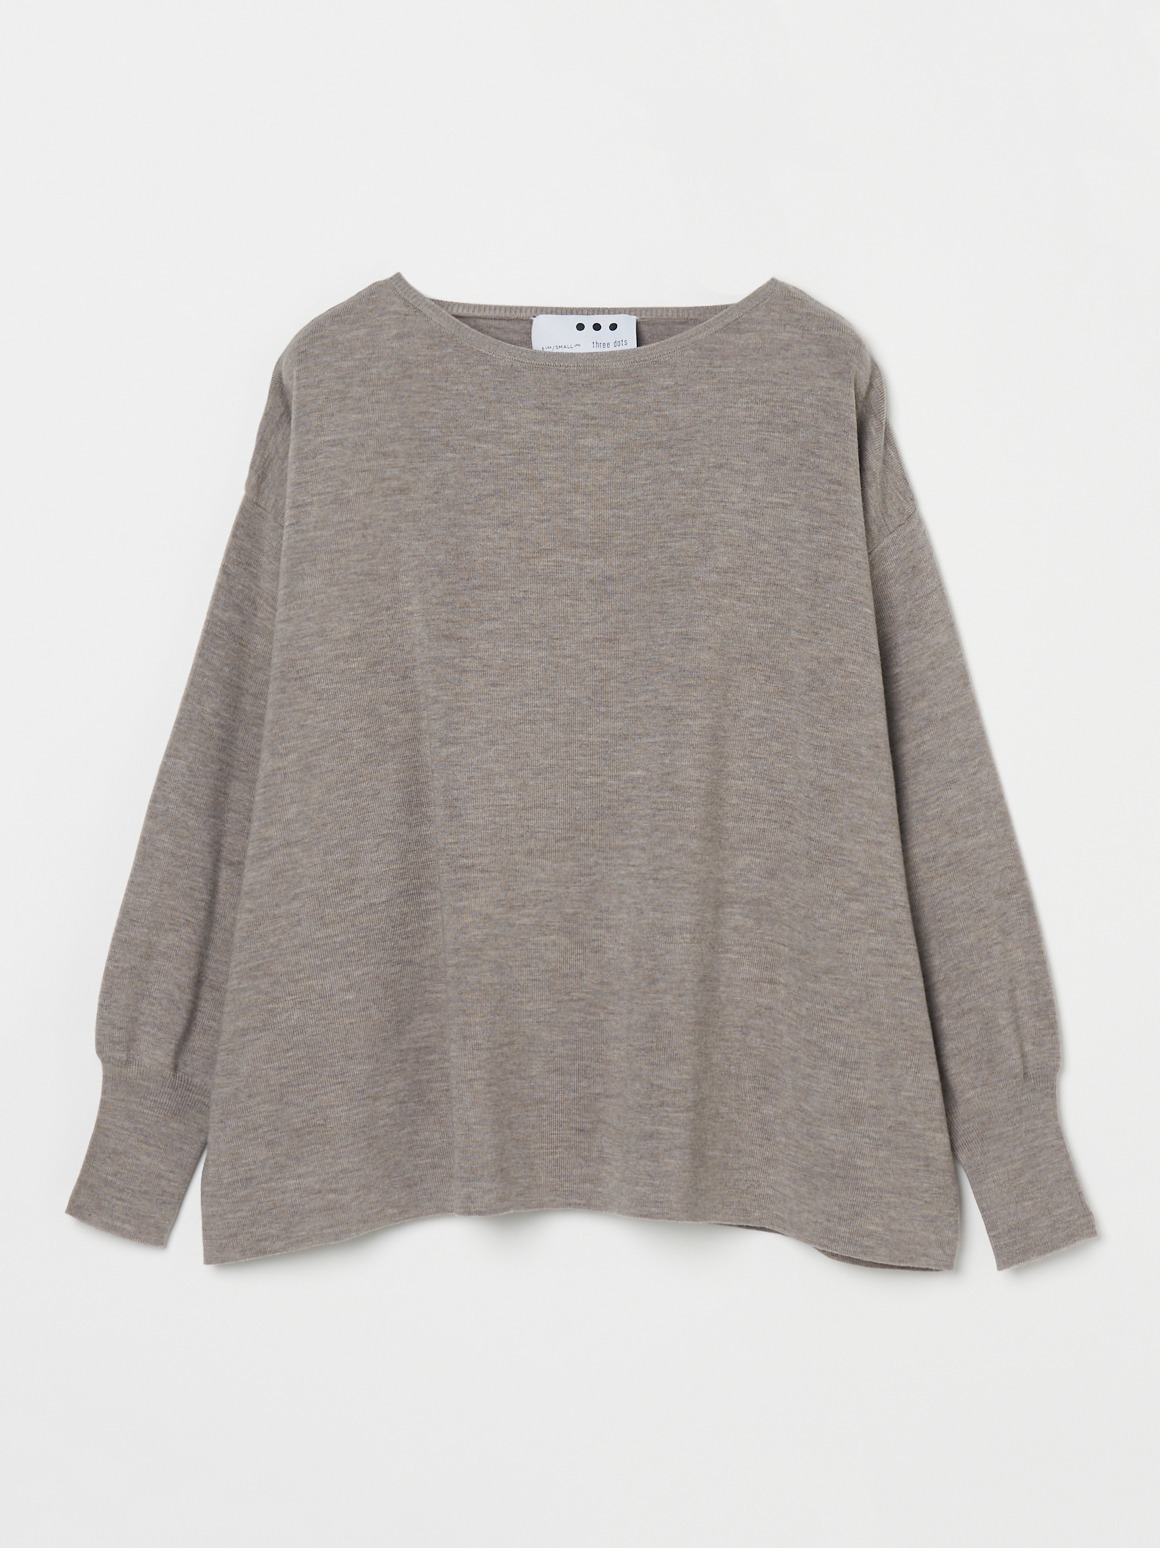 Wool outfit l/s boatneck 詳細画像 heather grey 2